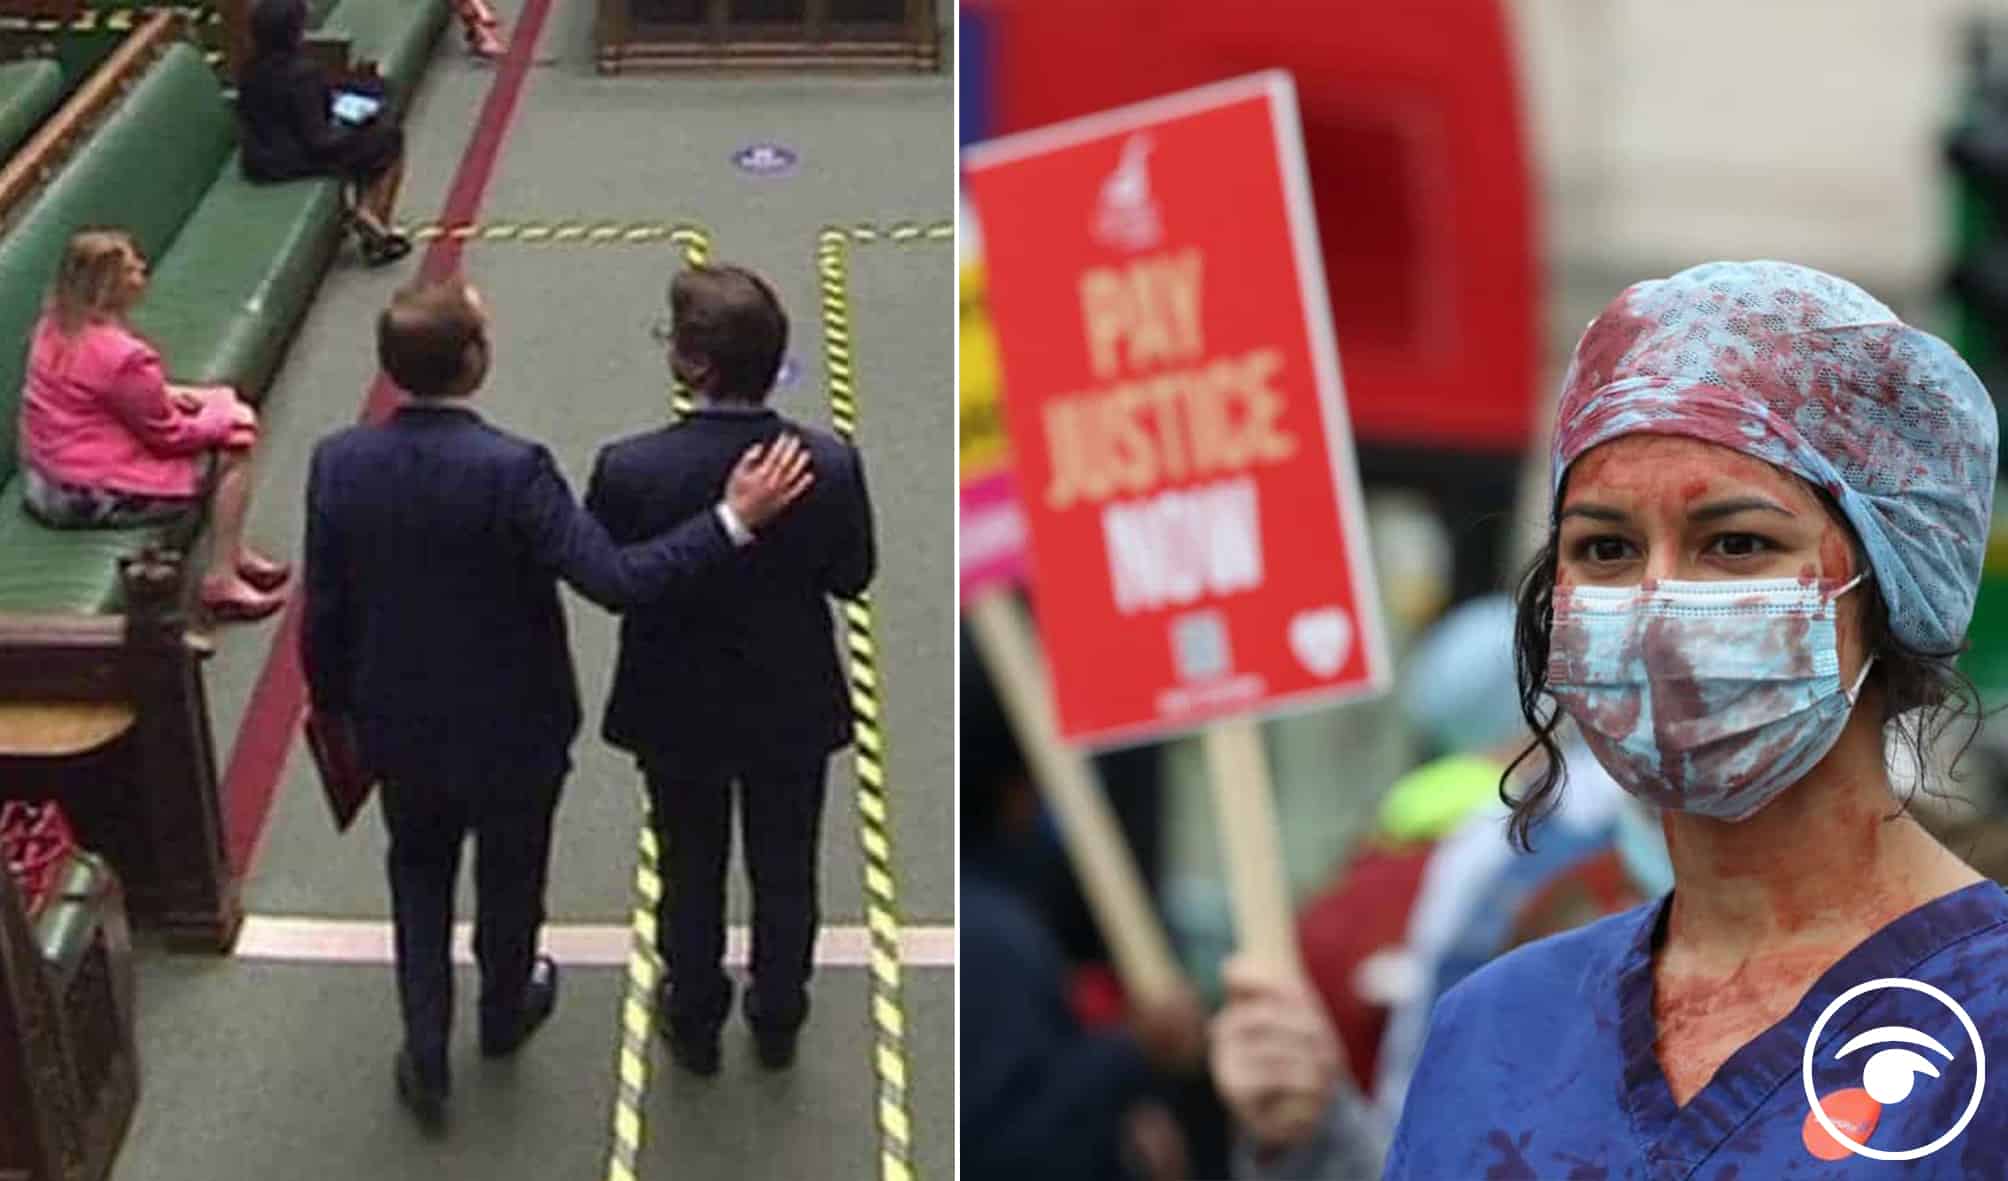 Nurses will have to “live off the claps” as MPs get another pay rise